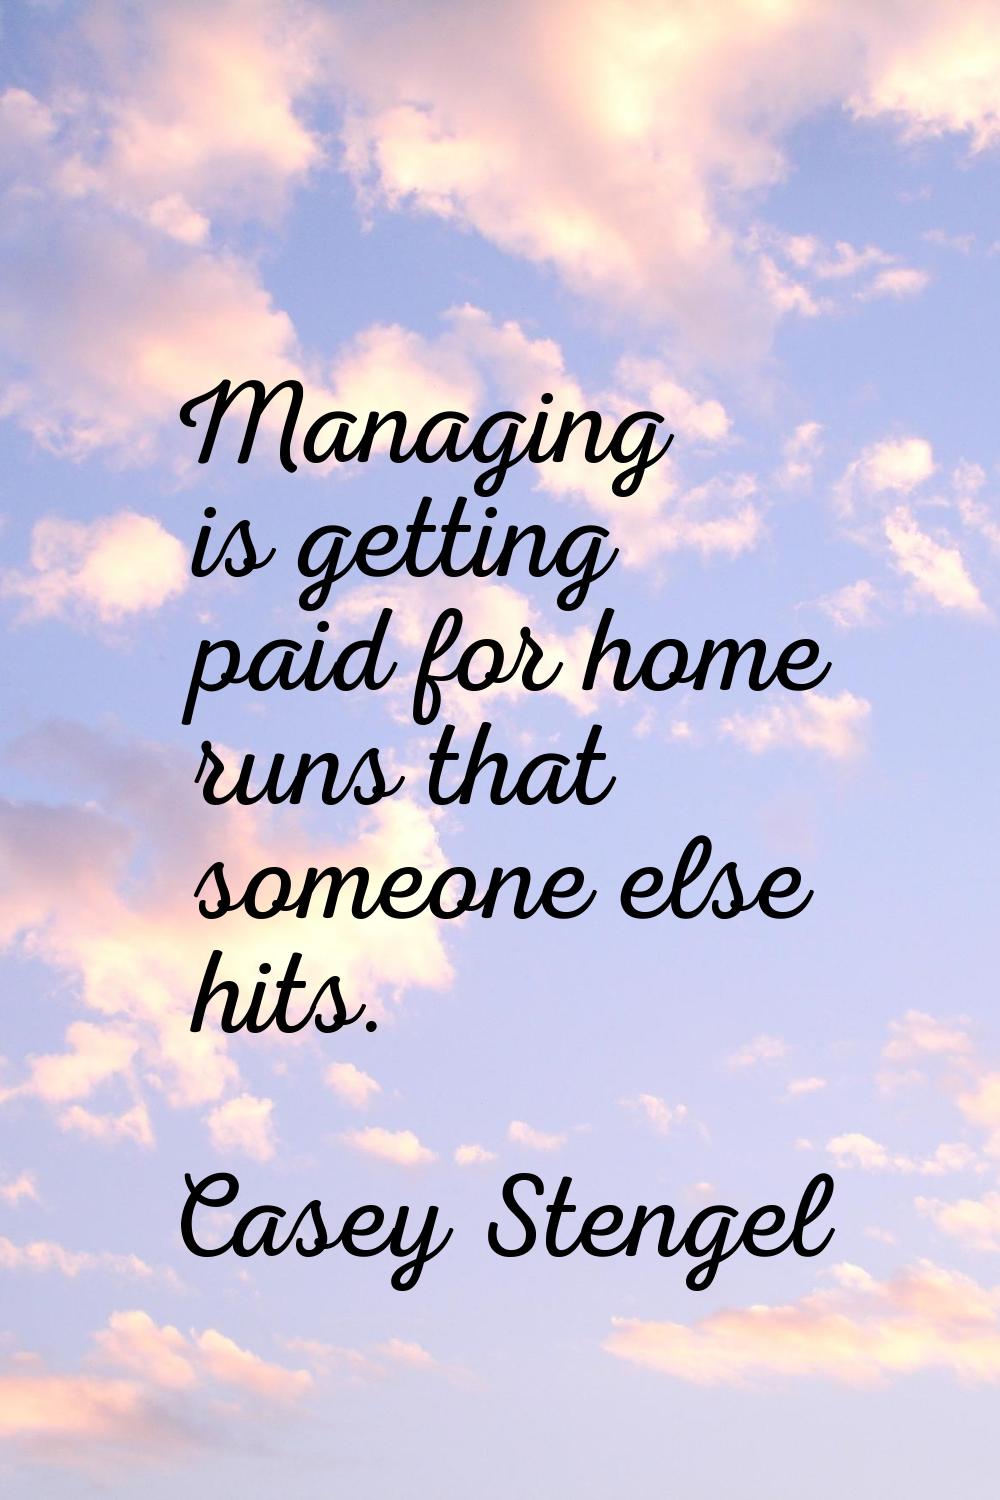 Managing is getting paid for home runs that someone else hits.